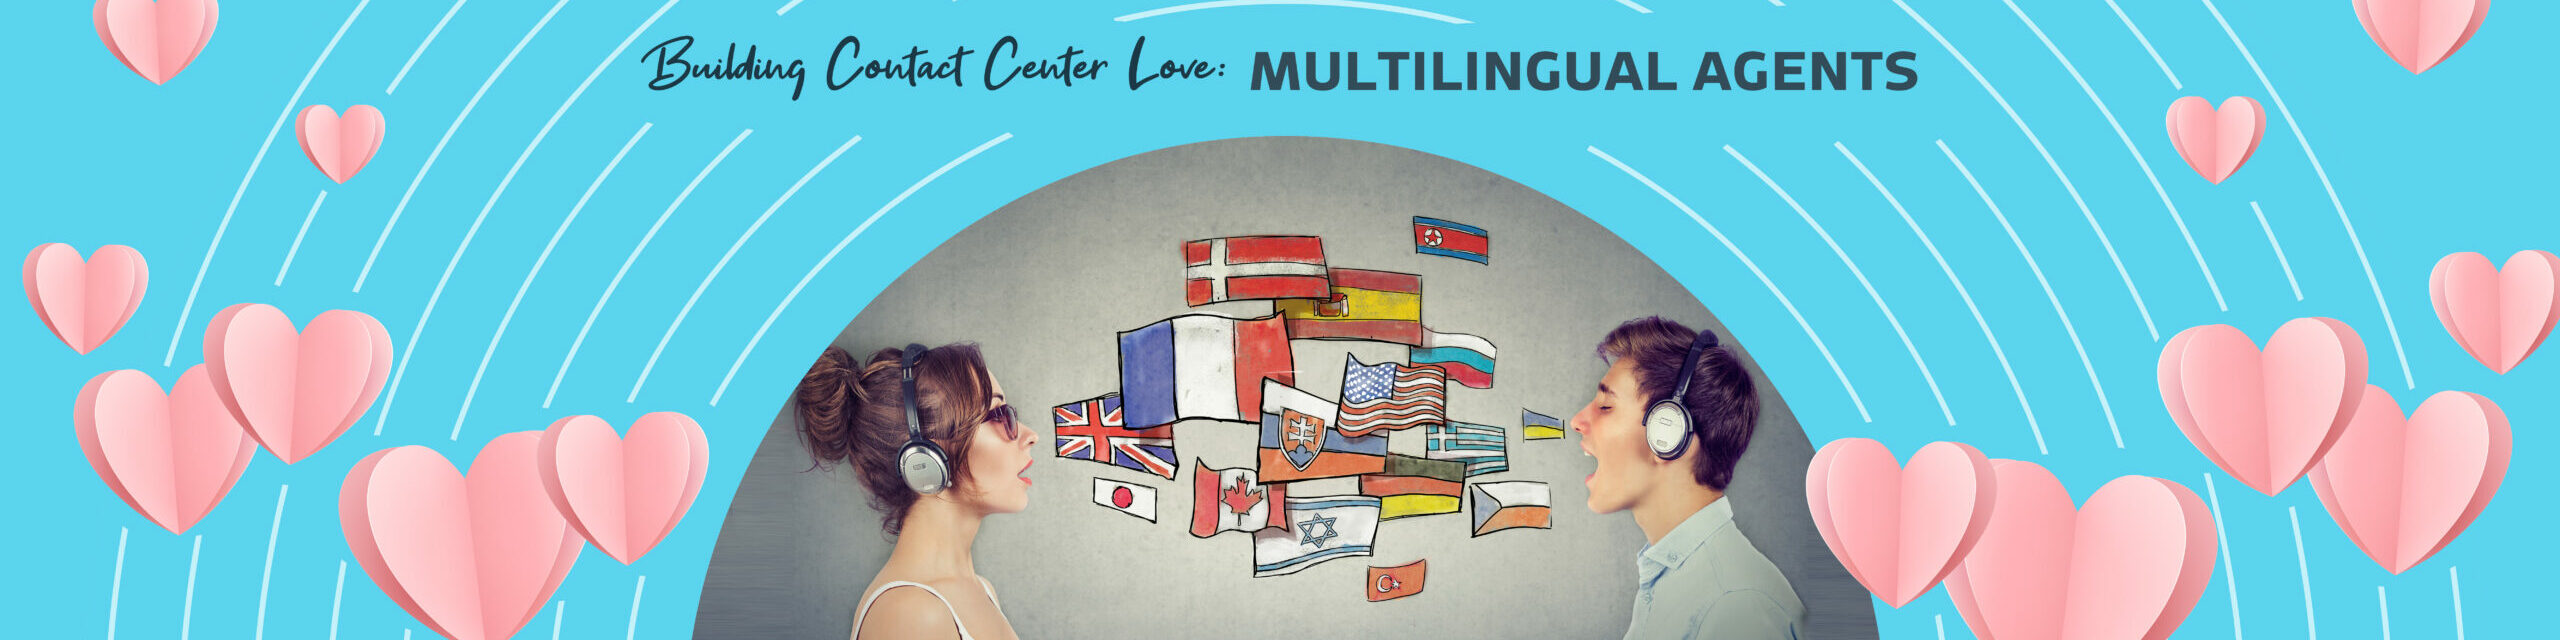 Building Contact Center Love: Why We All Need More Multilingual Agents